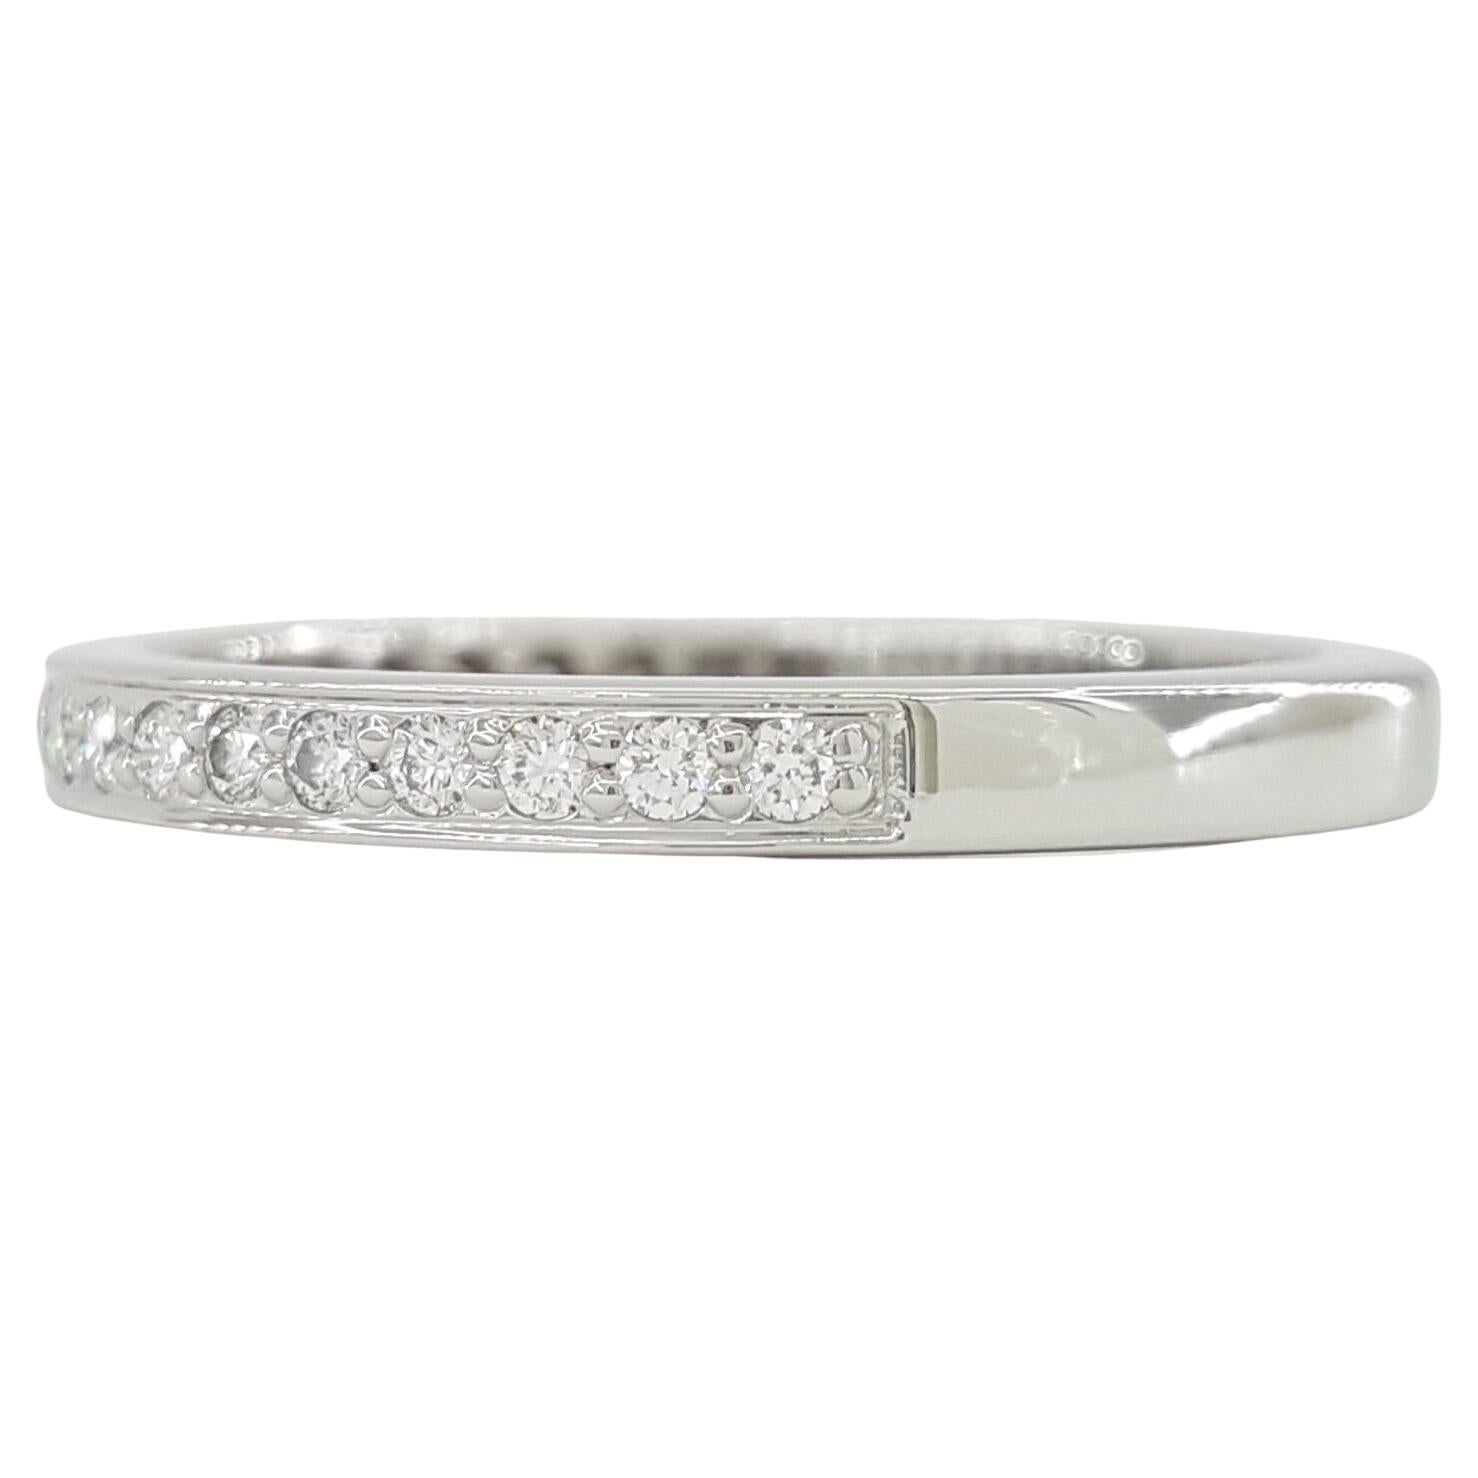 Genuine Tiffany & Co Platinum Half Circle Wedding/Anniversary Band featuring a total diamond weight of 0.22 ct. The ring, weighing 4 grams and sized 6.5, showcases 22 Natural Round Brilliant Cut Diamonds with E-G color and VVS-VS clarity.

Designed